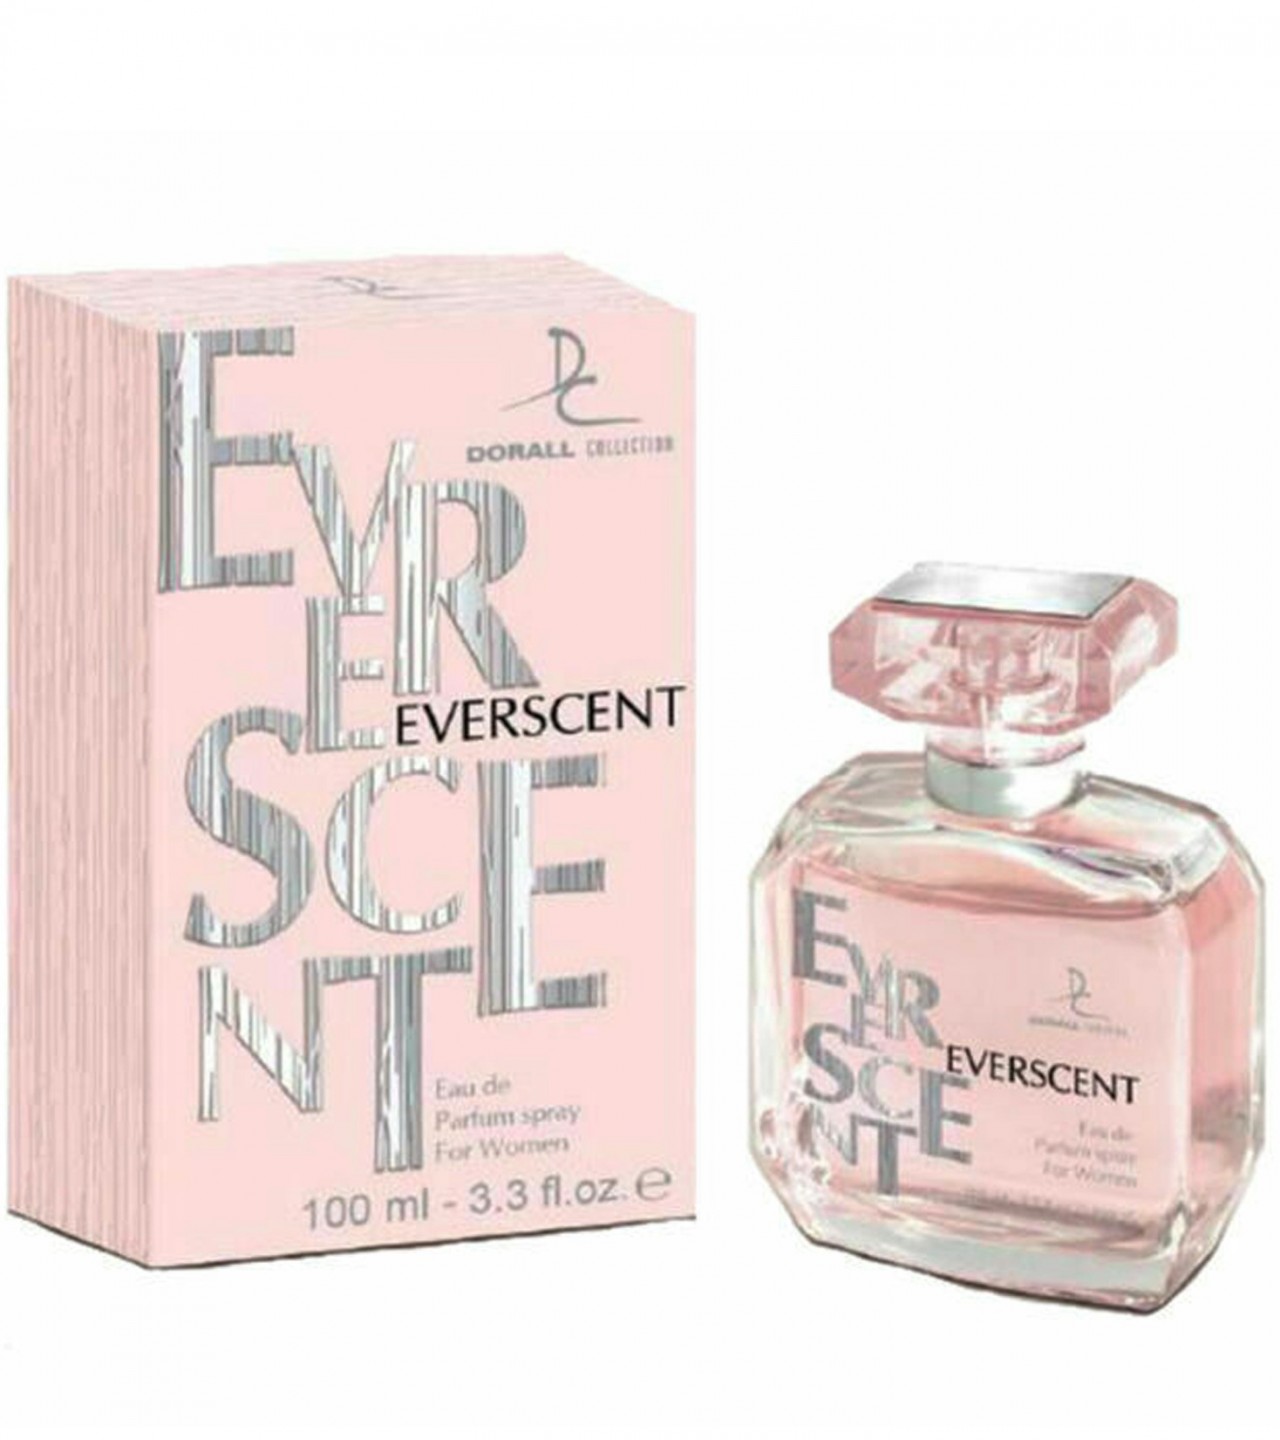 Dorall Collection Ever-scent Perfume For Women – 100 ml